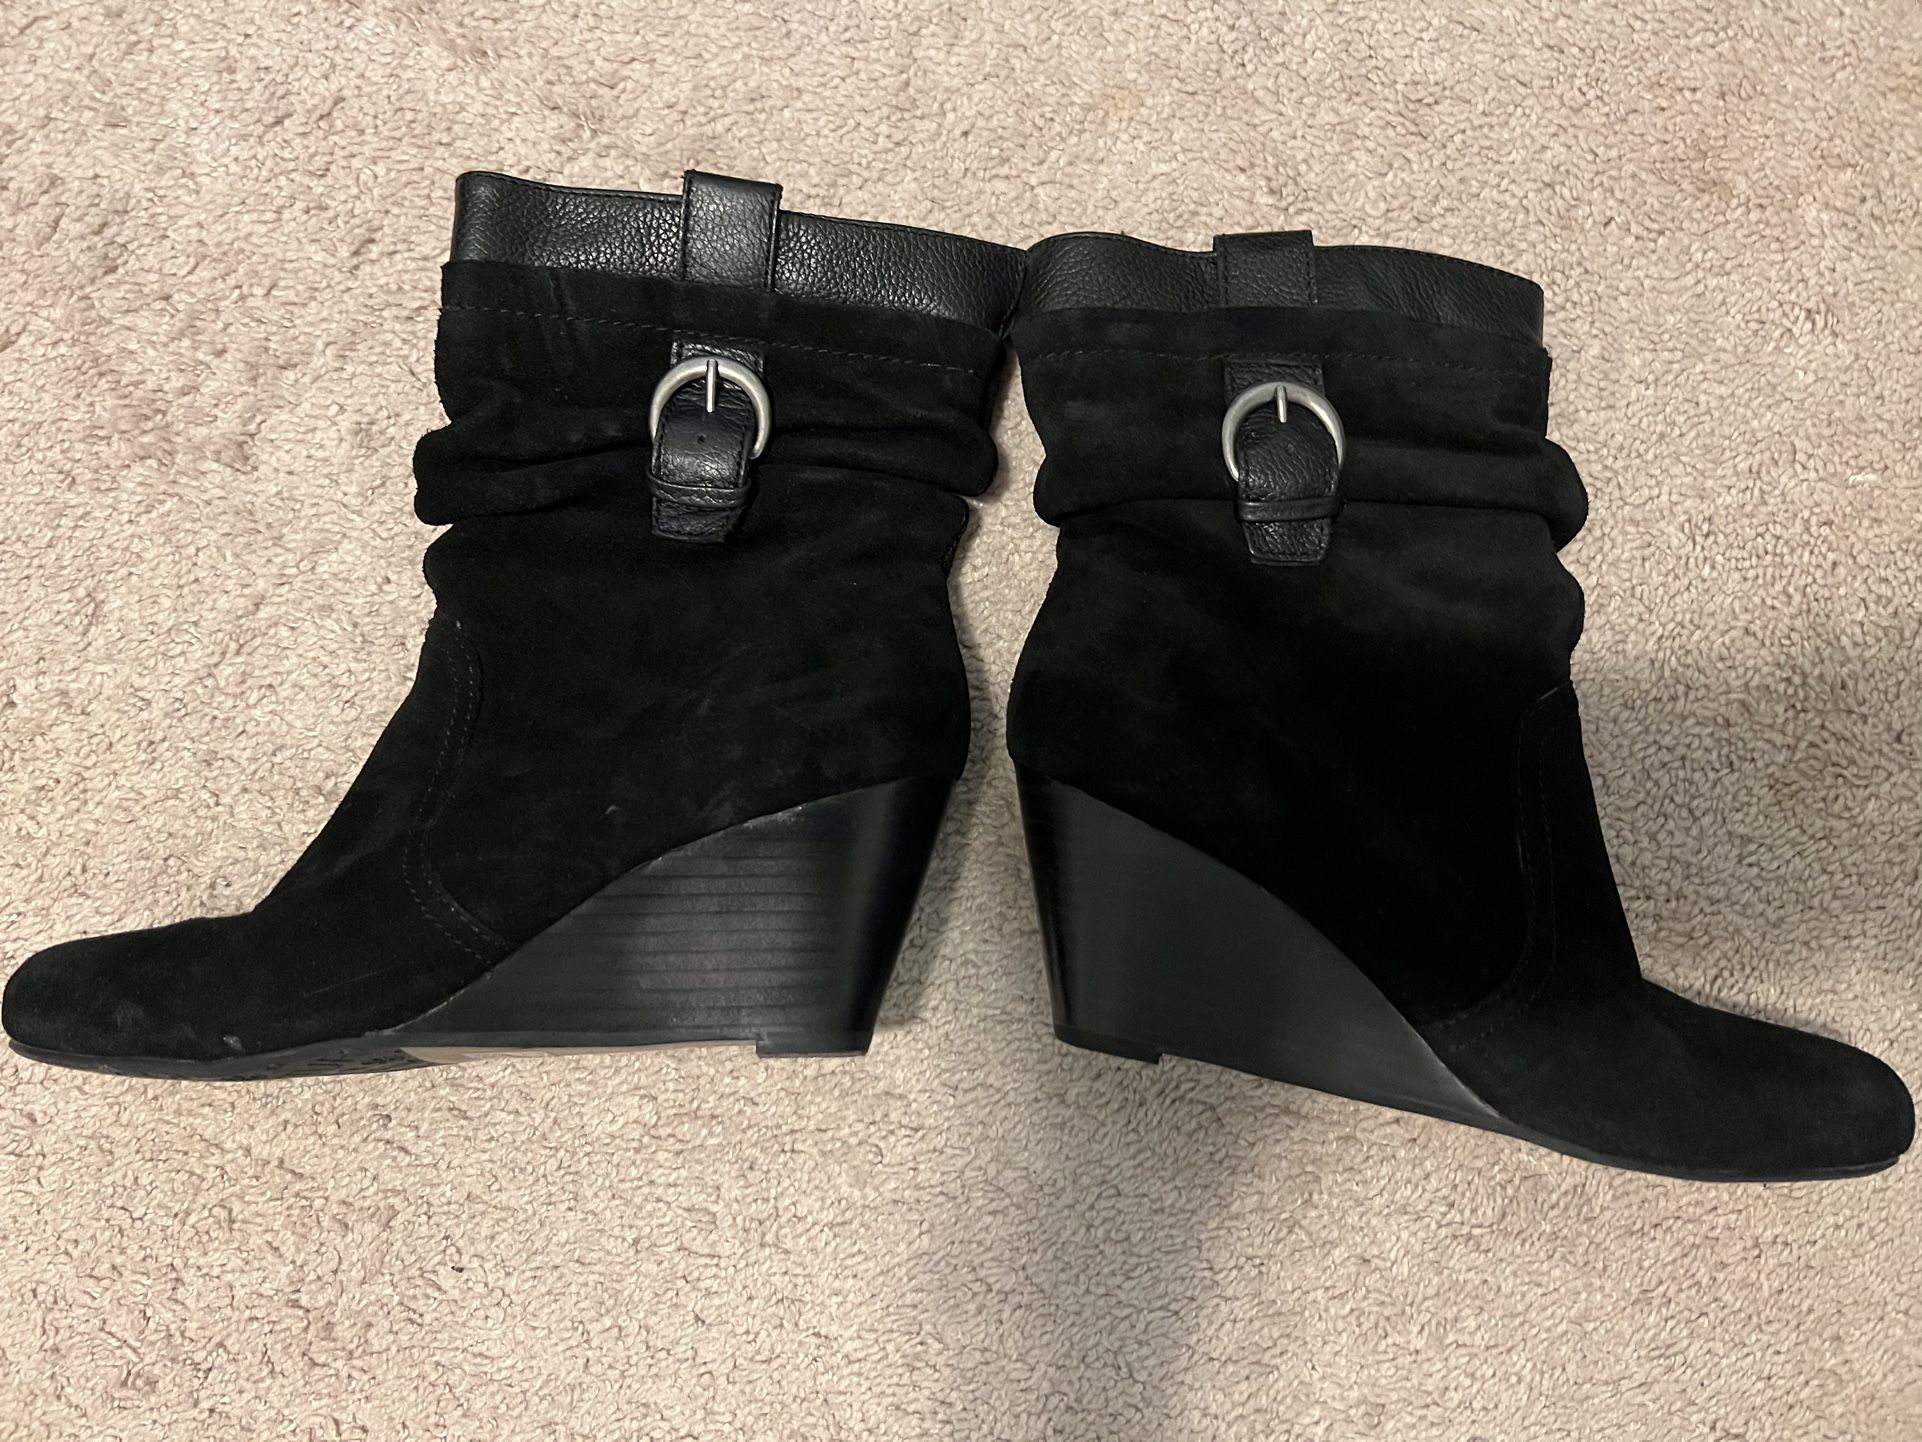 Black Faux Suede Wedge bootie Size 8 1/2 M